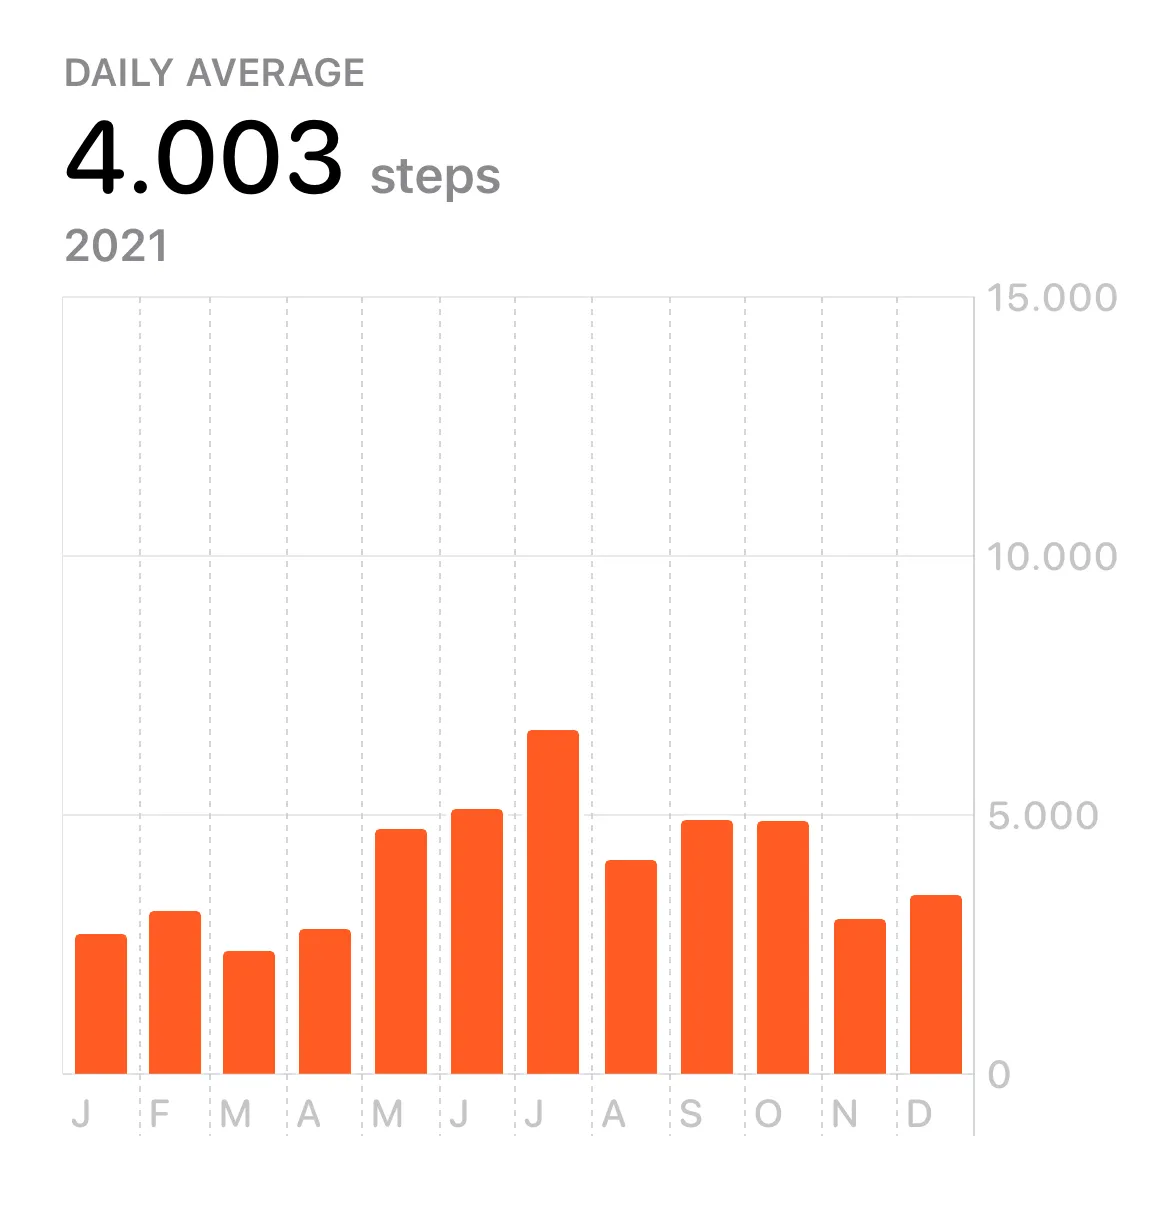 My daily average step count of 4003 steps per day in 2021